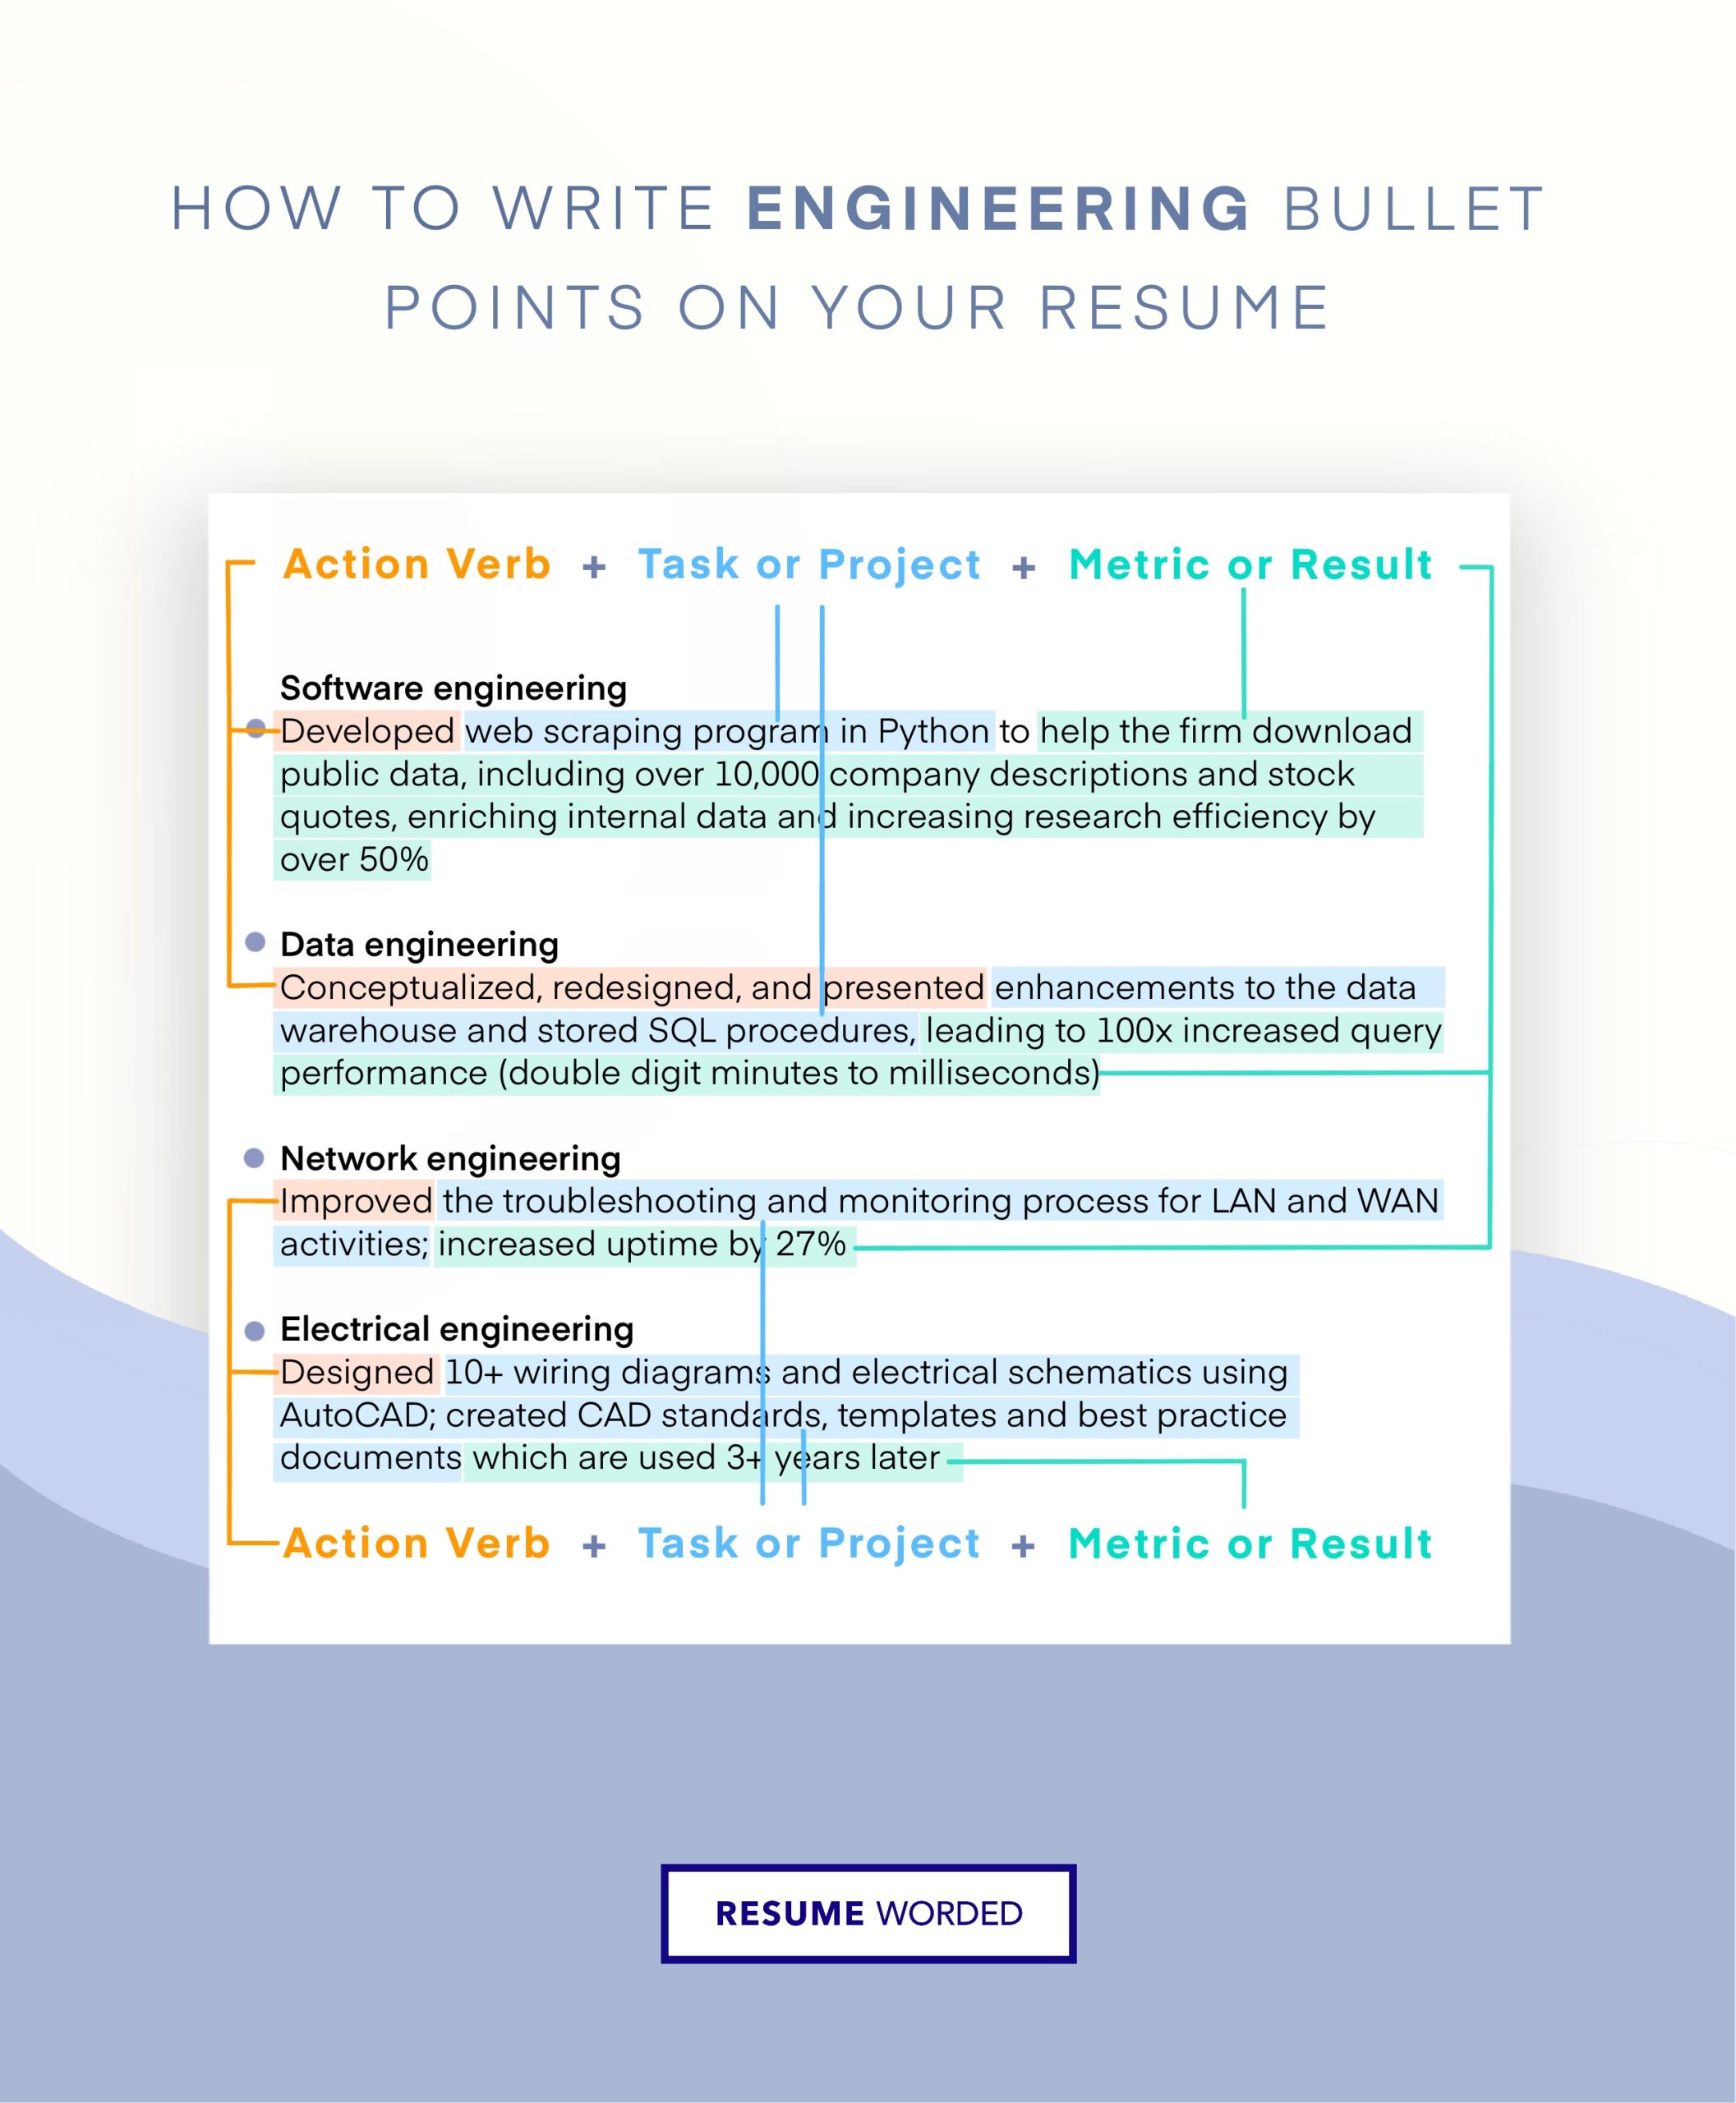 Sample Resumes for New Product Development Engineer Resume Skills and Keywords for Product Development Engineer …